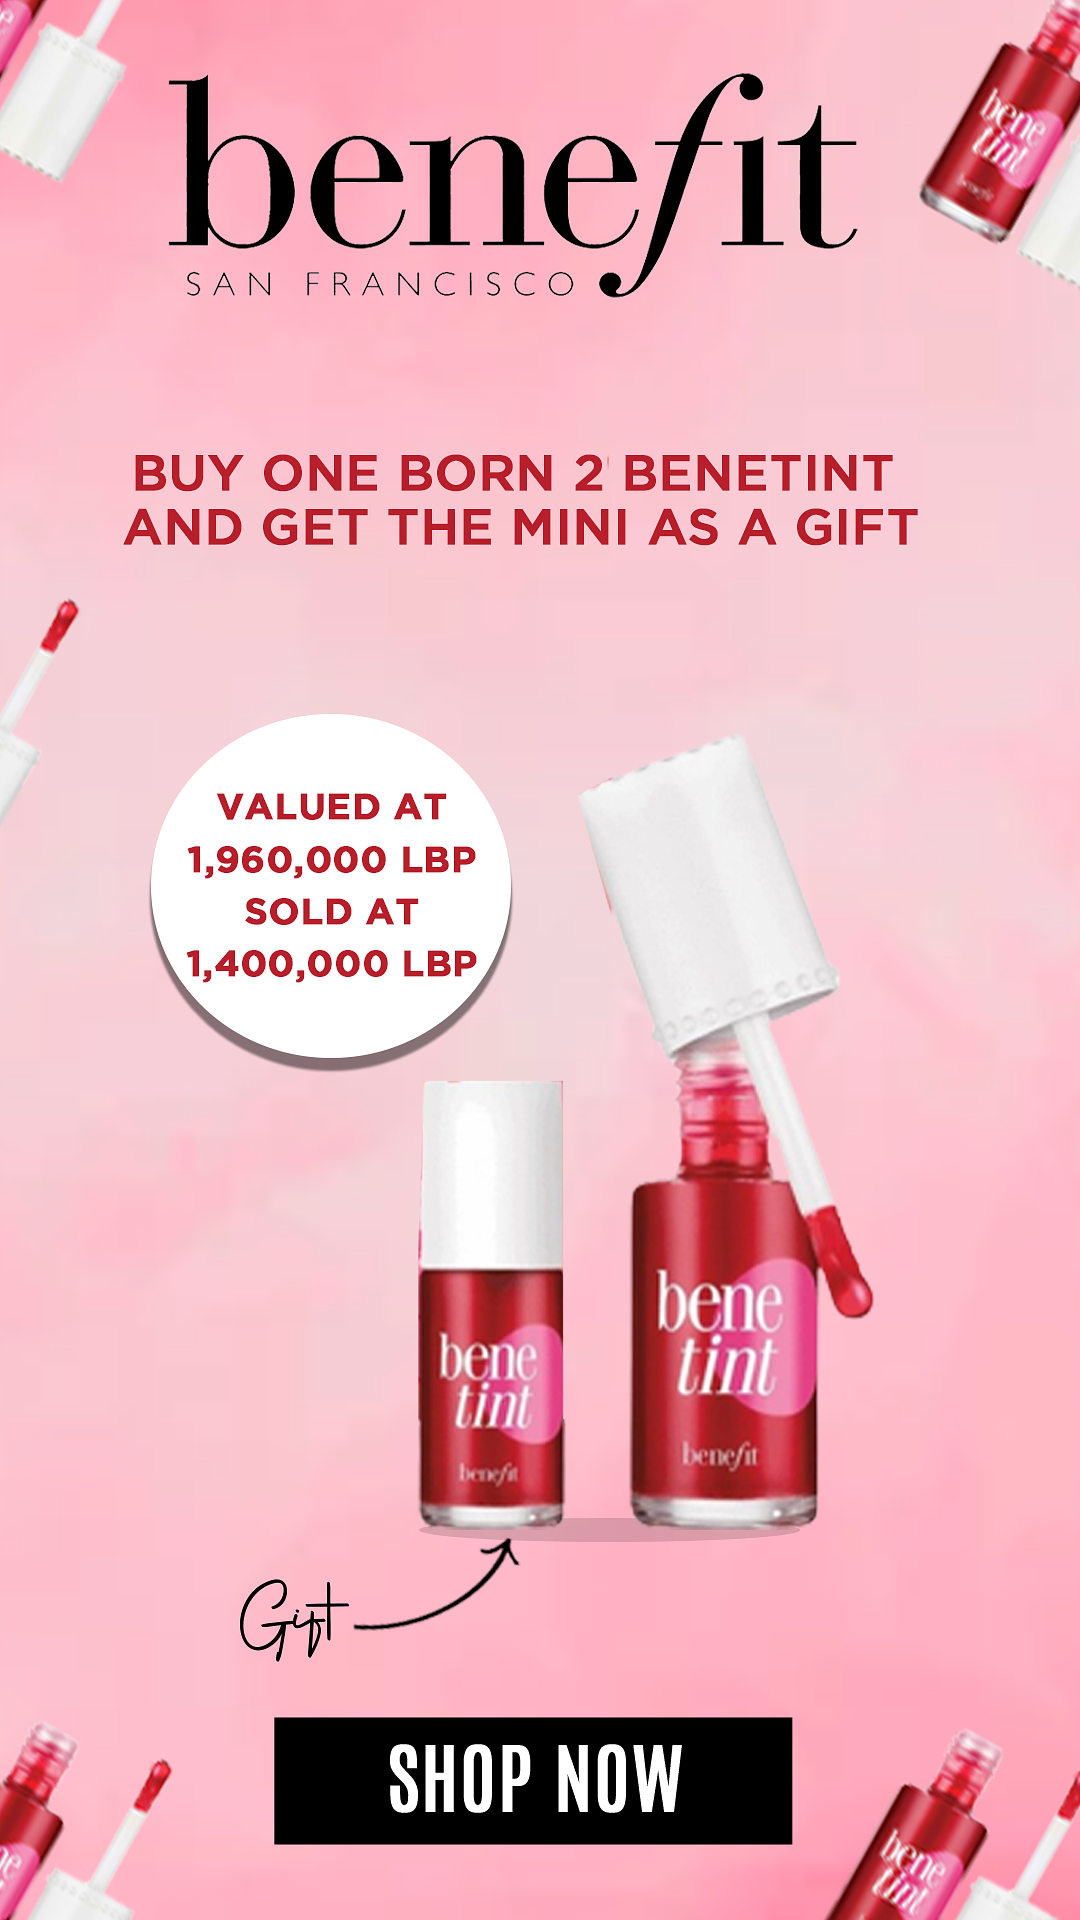 7 benefit SAN FRANCISCO BUY ONE BORN 2 BENETINT AND GET THE MINI AS A GIFT VALUED AT 1,960,000 LBP SOLD AT 1,400,000 LBP 